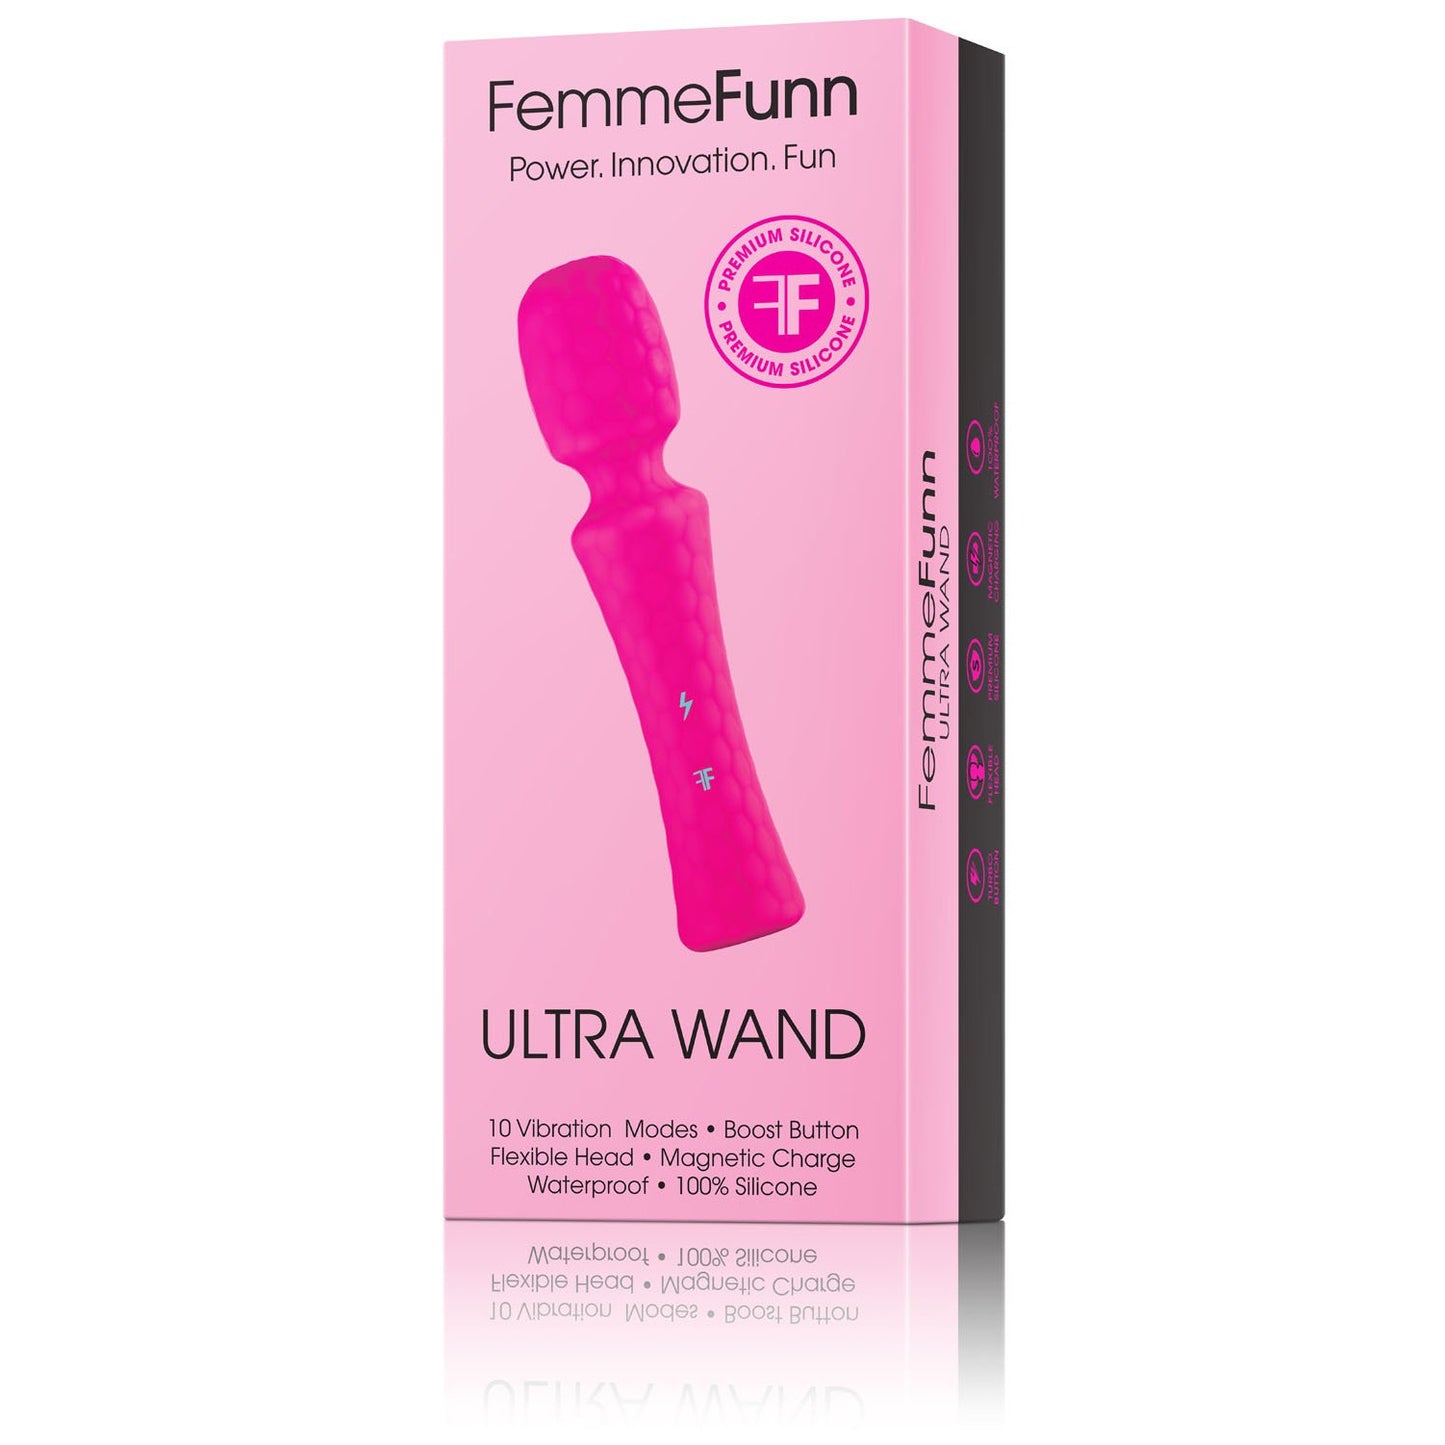 Ultra Wand packaging - Femme Funn - by The Bigger O - an online sex toy shop. We ship to USA, Canada and the UK.